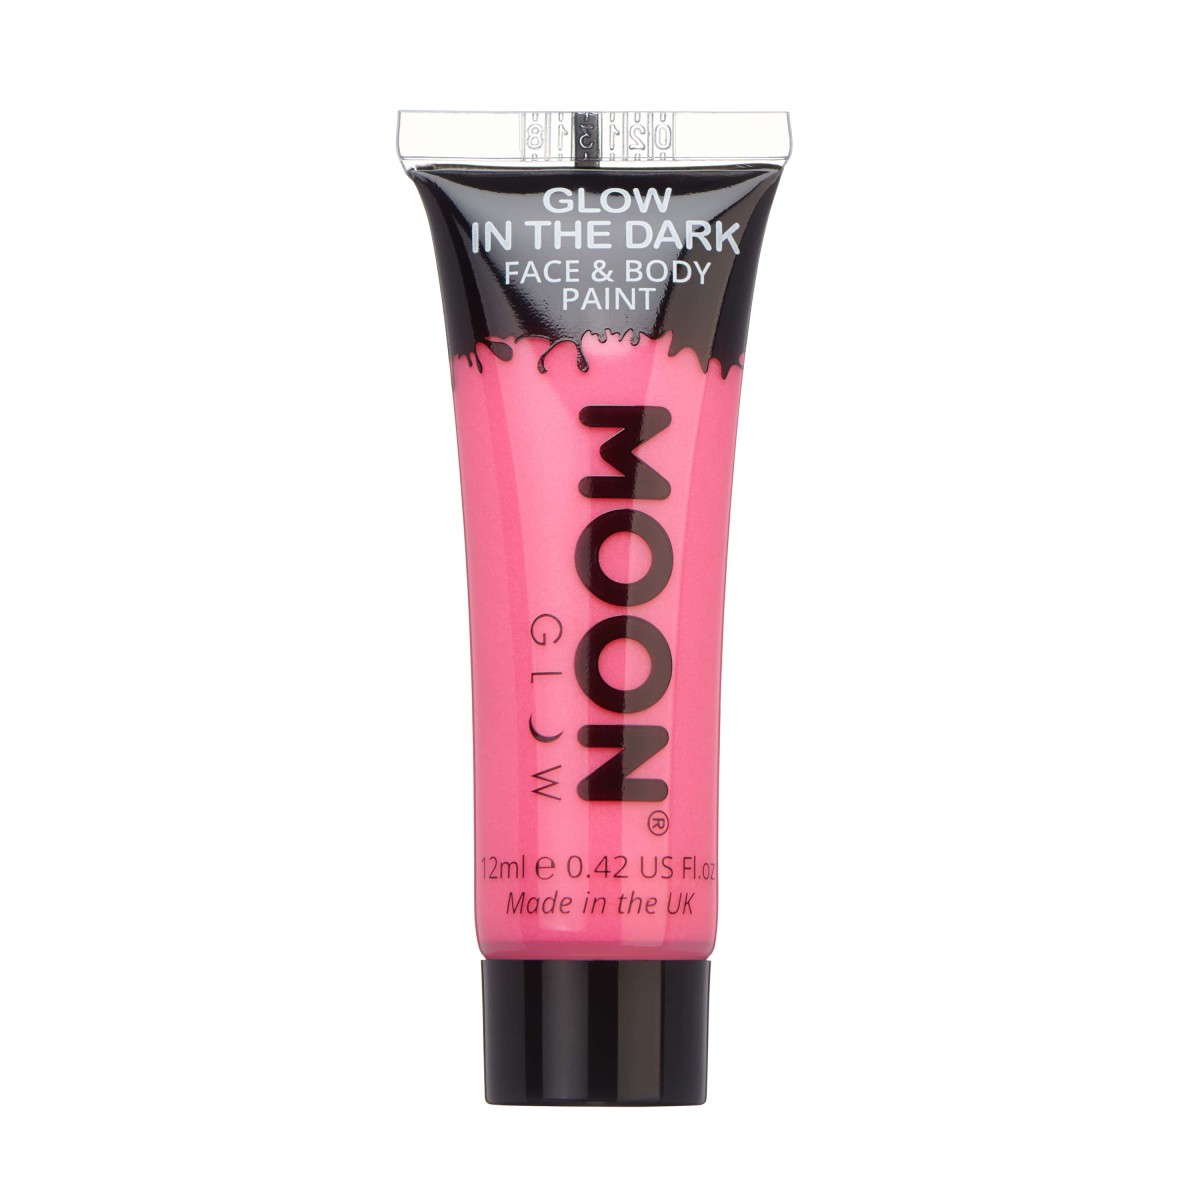 MOON CREATIONS M29 GLOW IN THE DARK FACE & BODY PAINT PINK 12ml